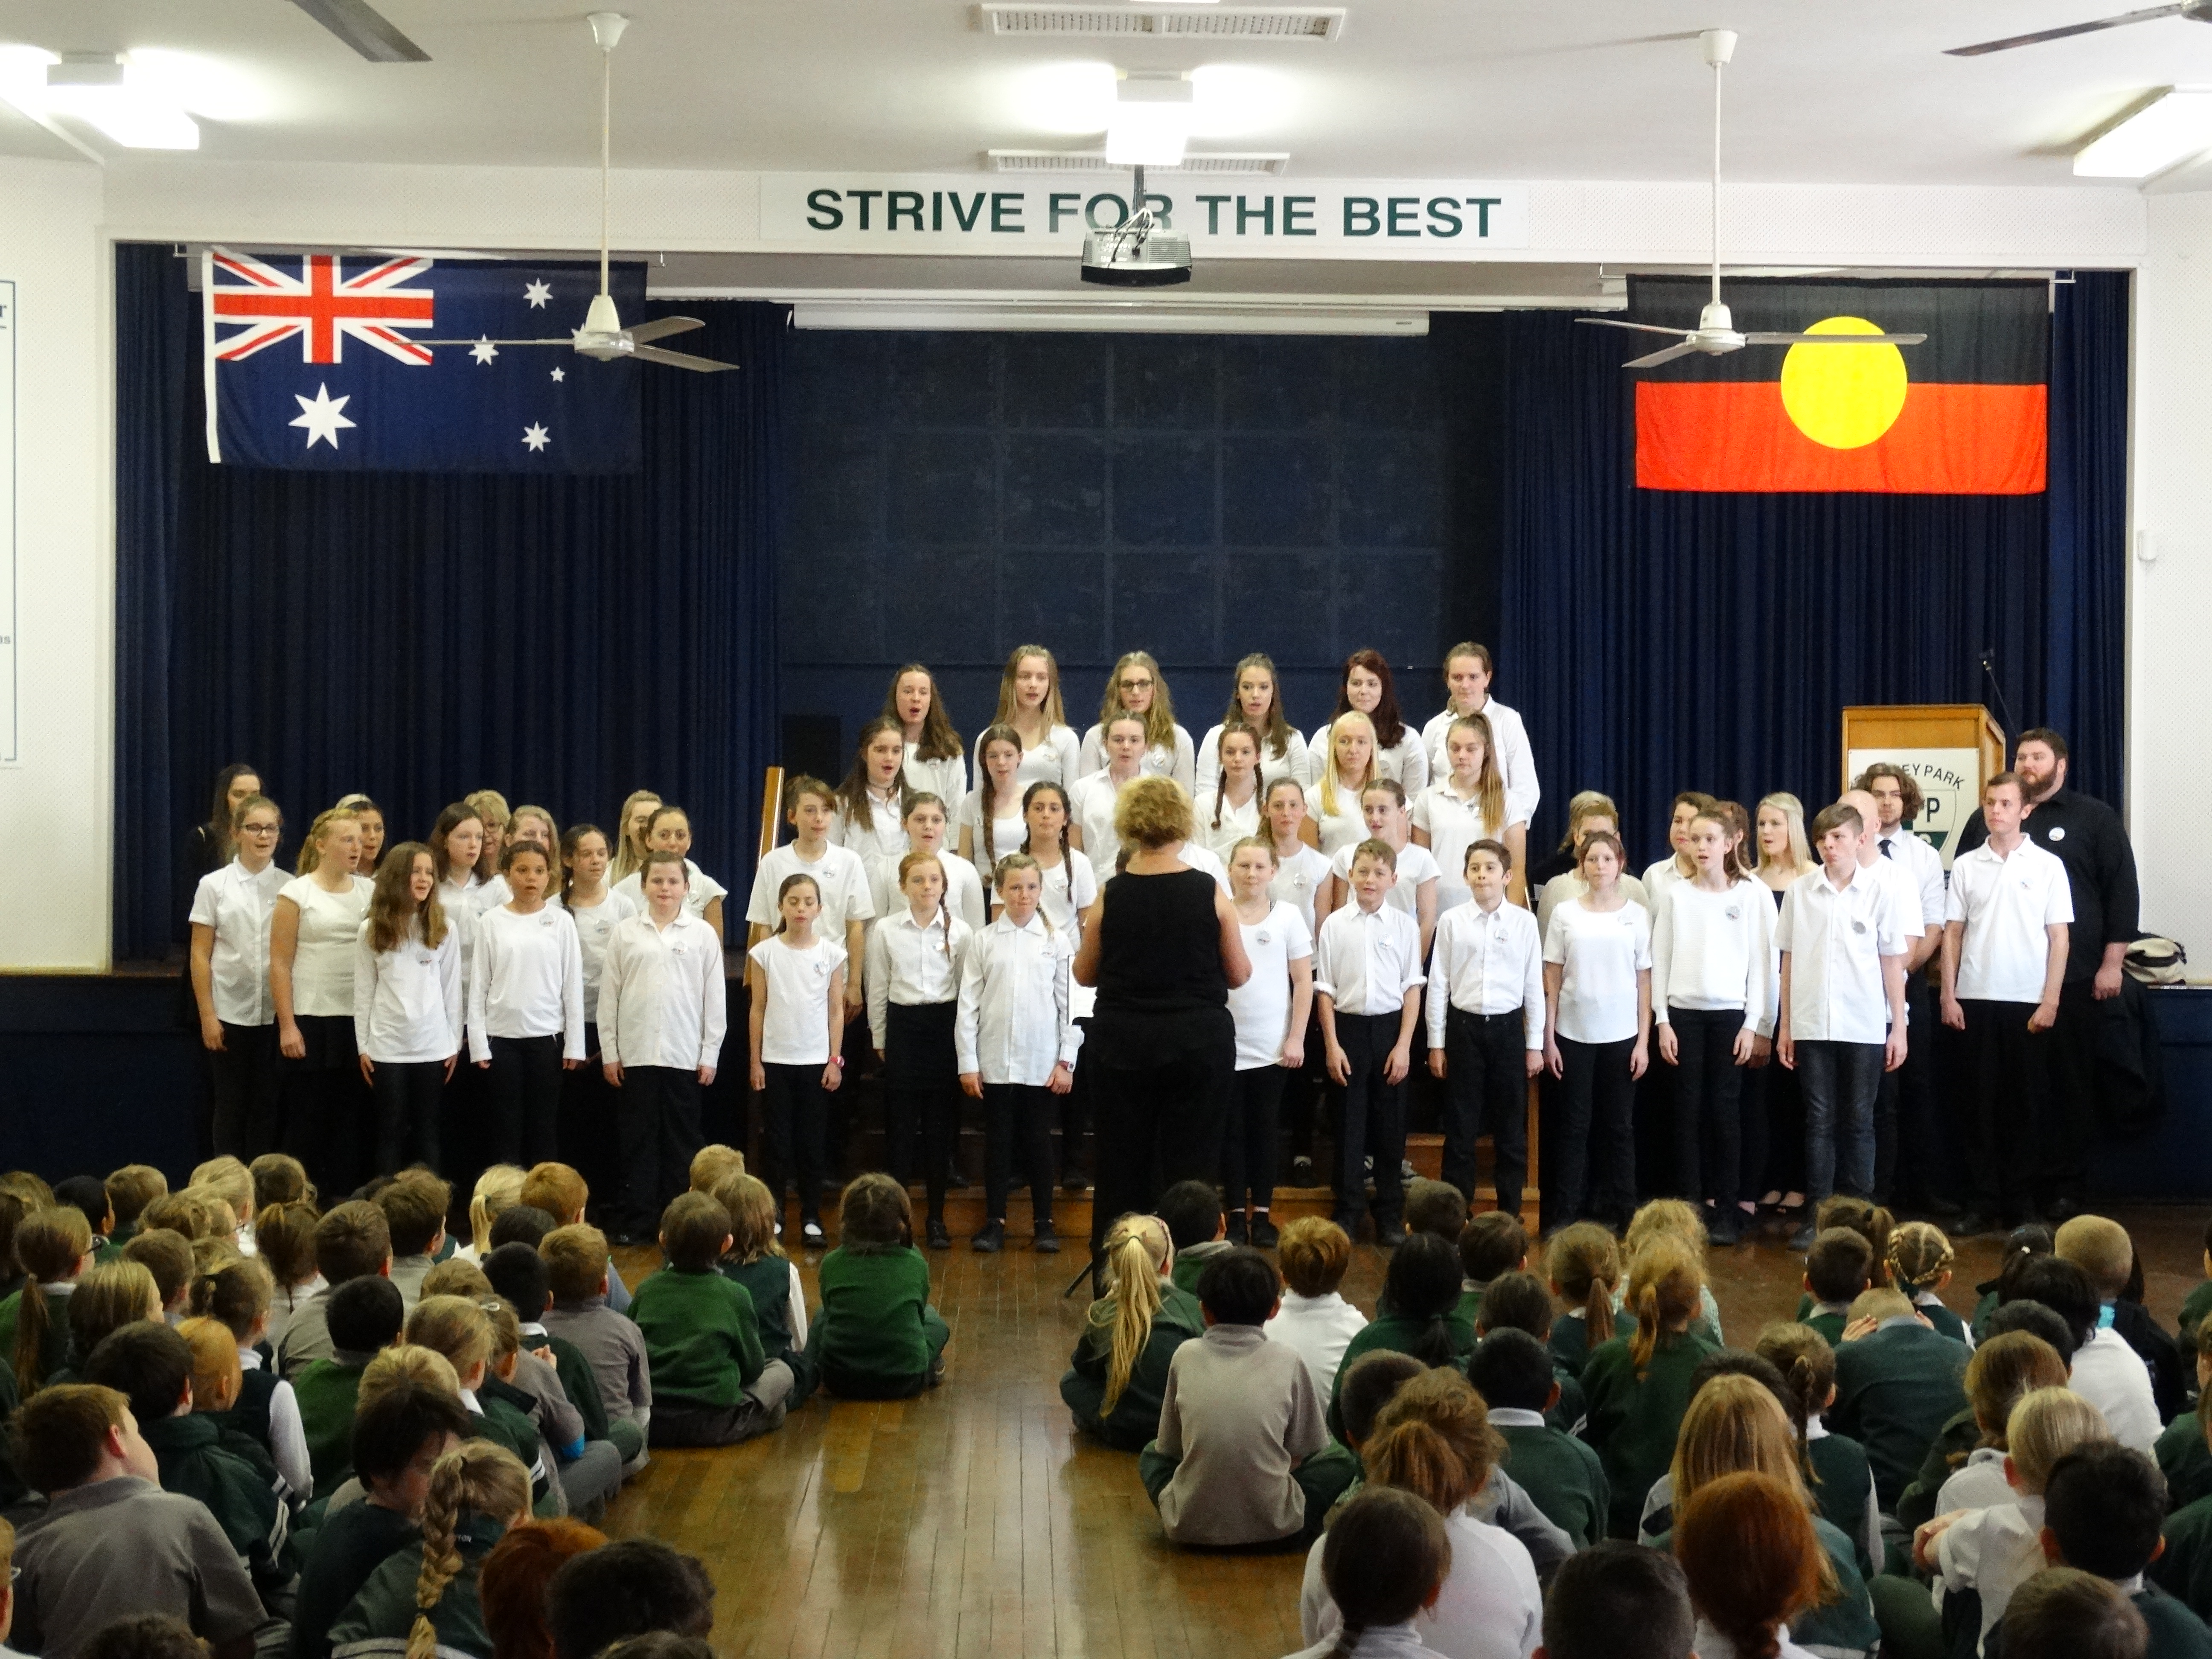 Camp choir performing for a primary school audience wearing white shirts and black pants